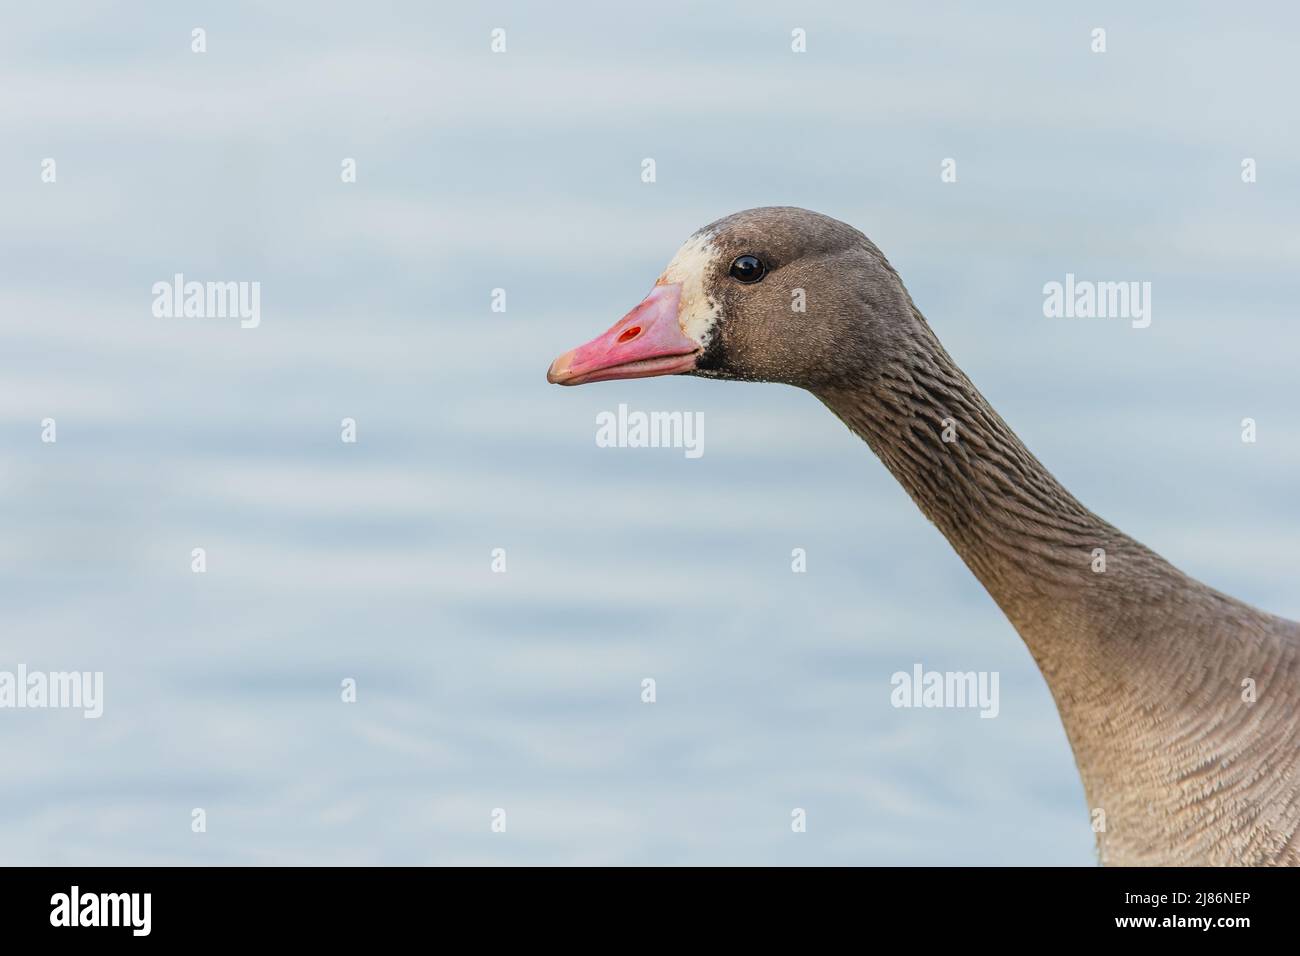 Head and neck of the greater white-fronted goose with pink beak. Blue water in the background. Stock Photo